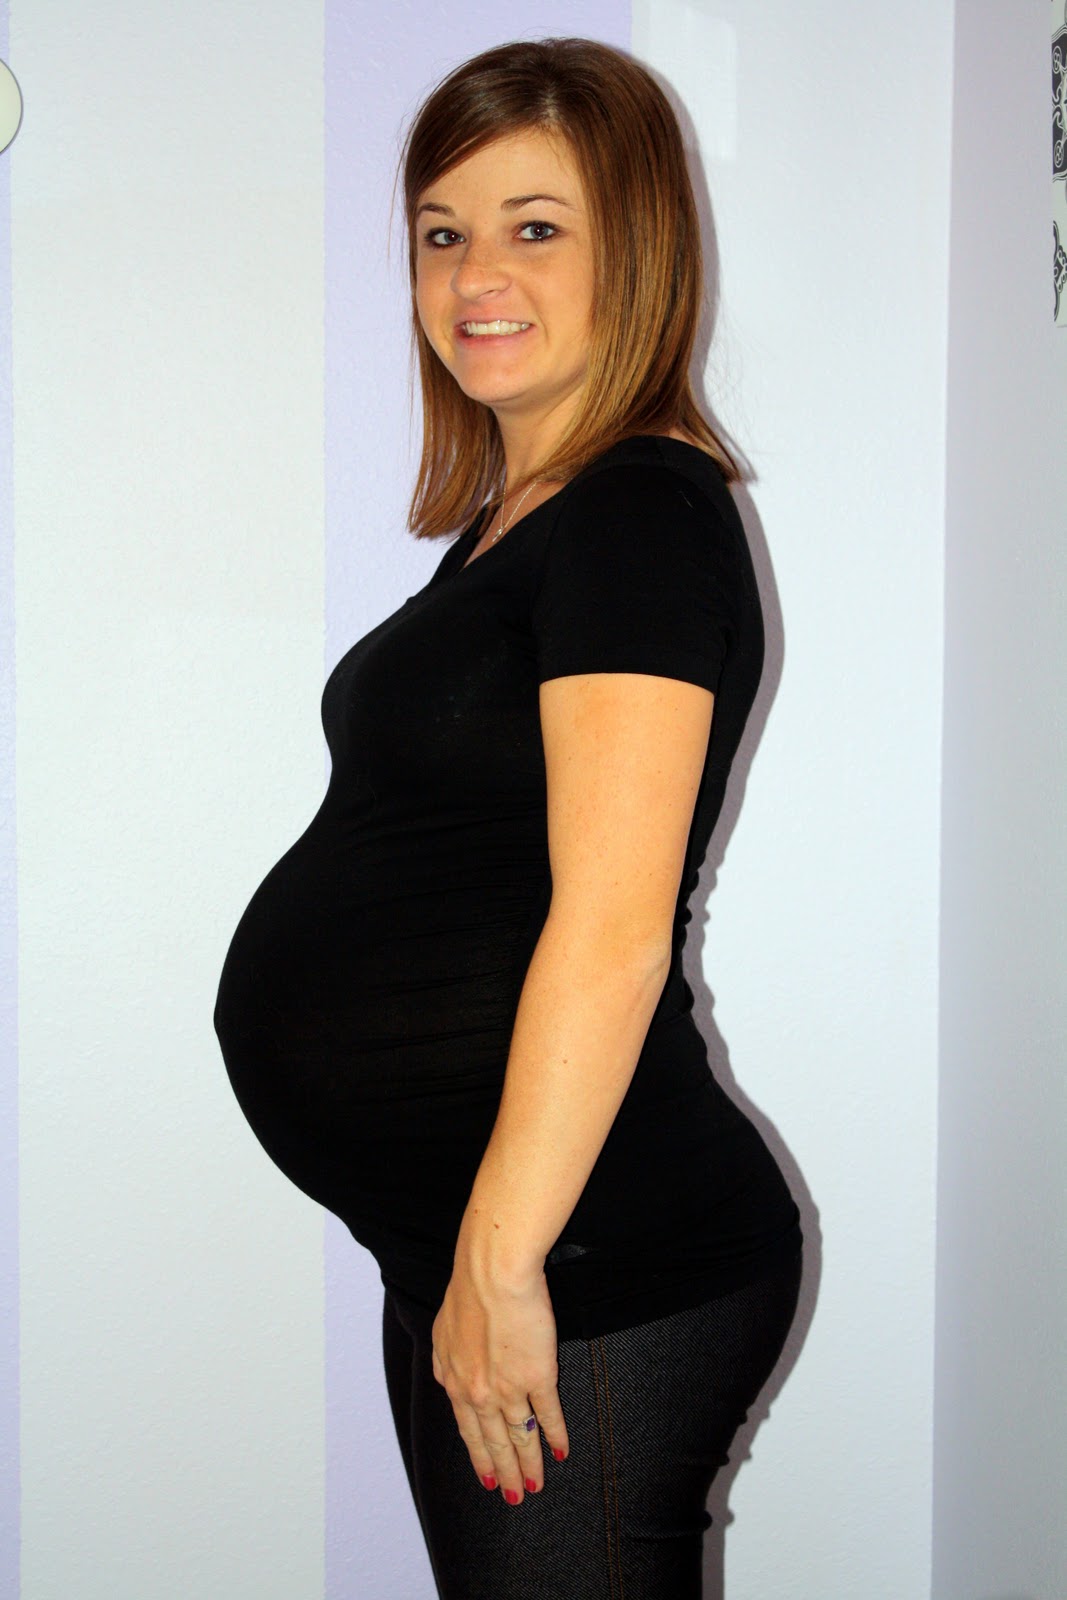 35 weeks pregnant - The Maternity Gallery